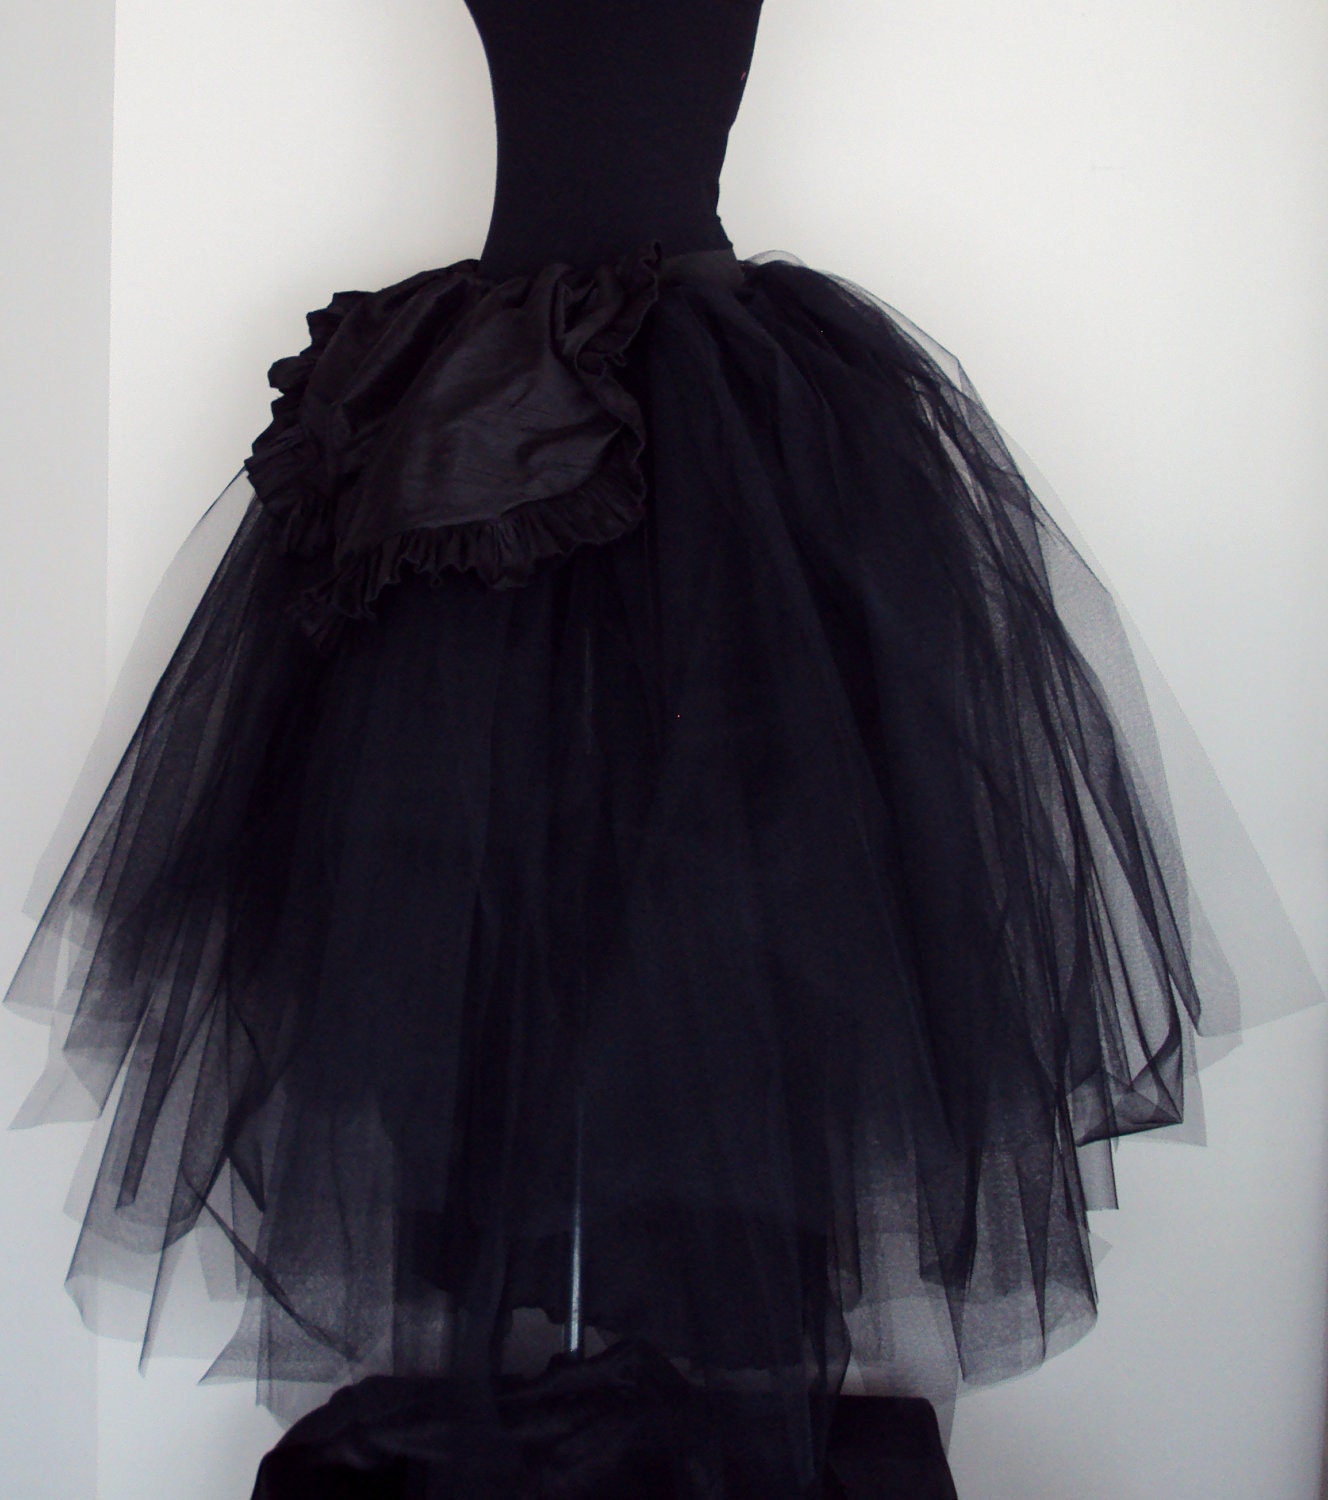 Bridal Wedding Skirt Black Tulle With Silk Skirt Front Size 4 5313